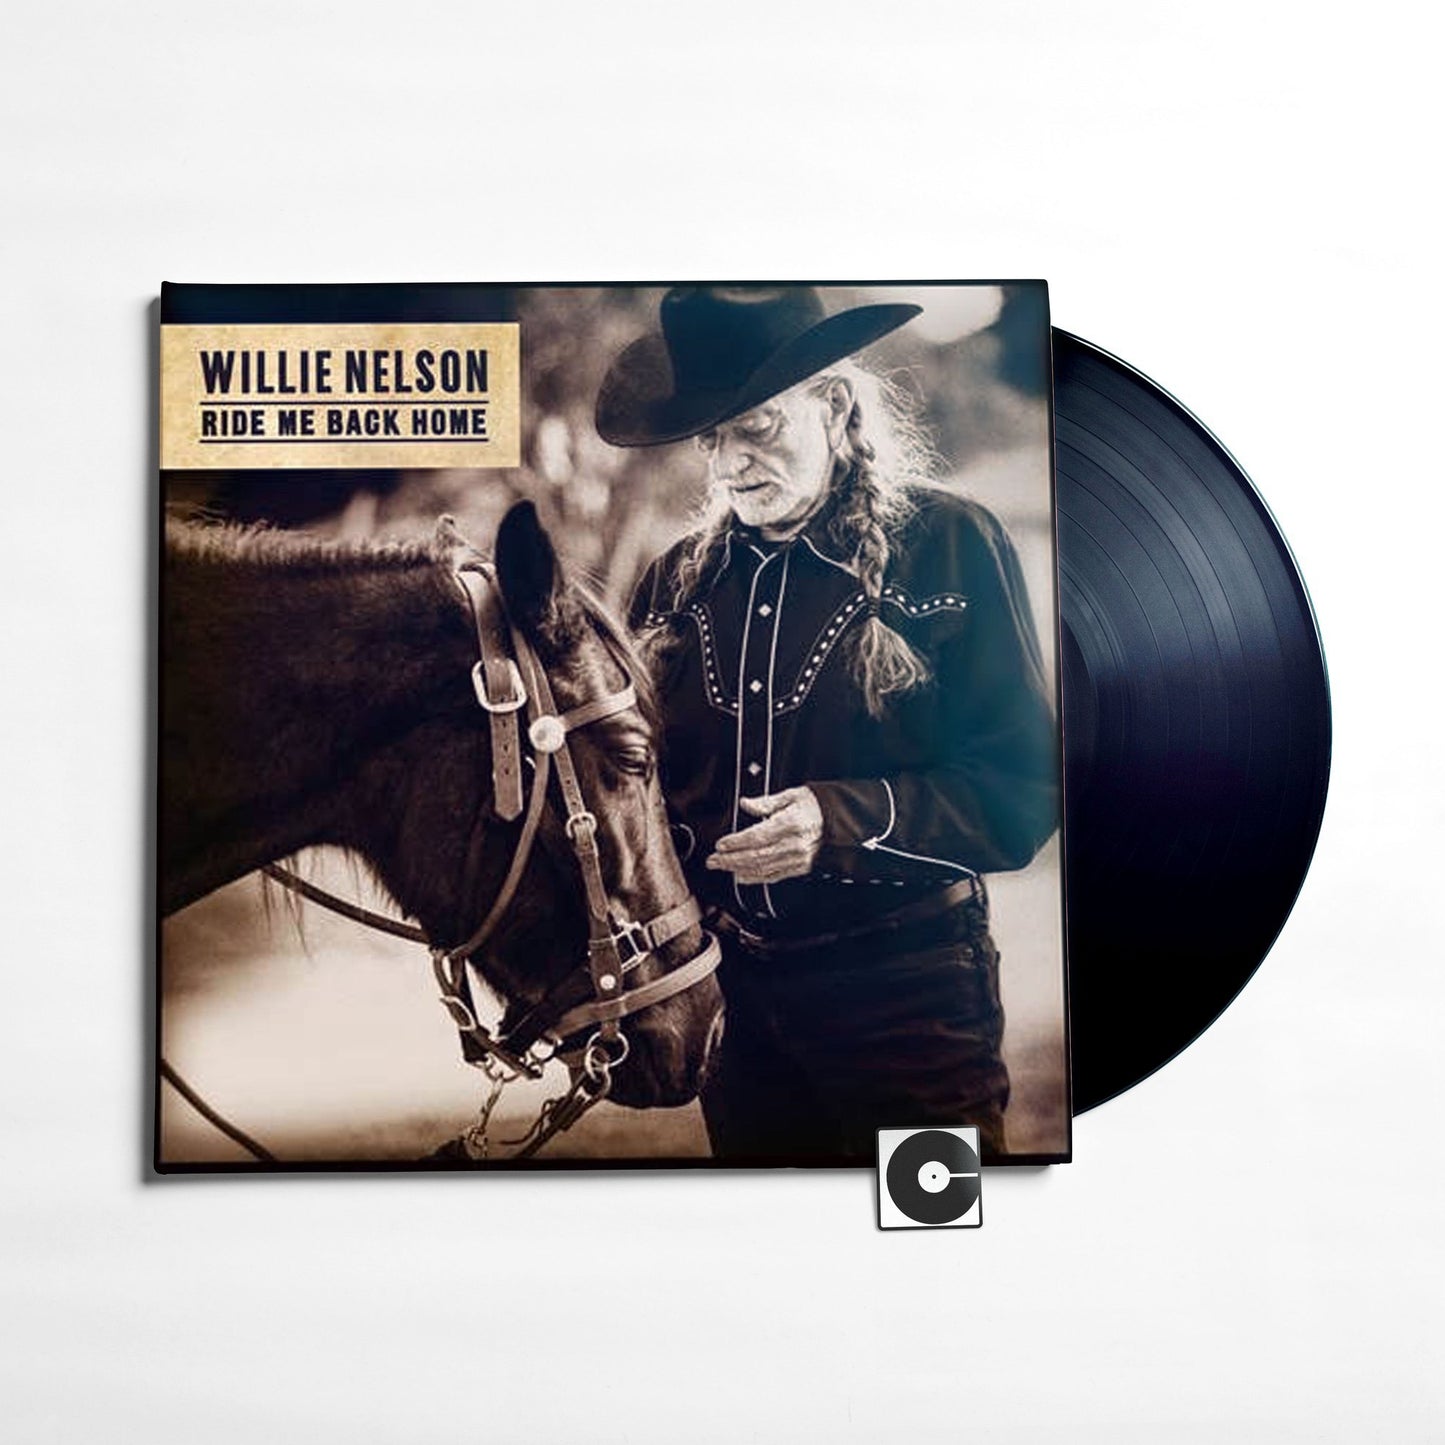 Willie Nelson - "Ride Me Back Home"